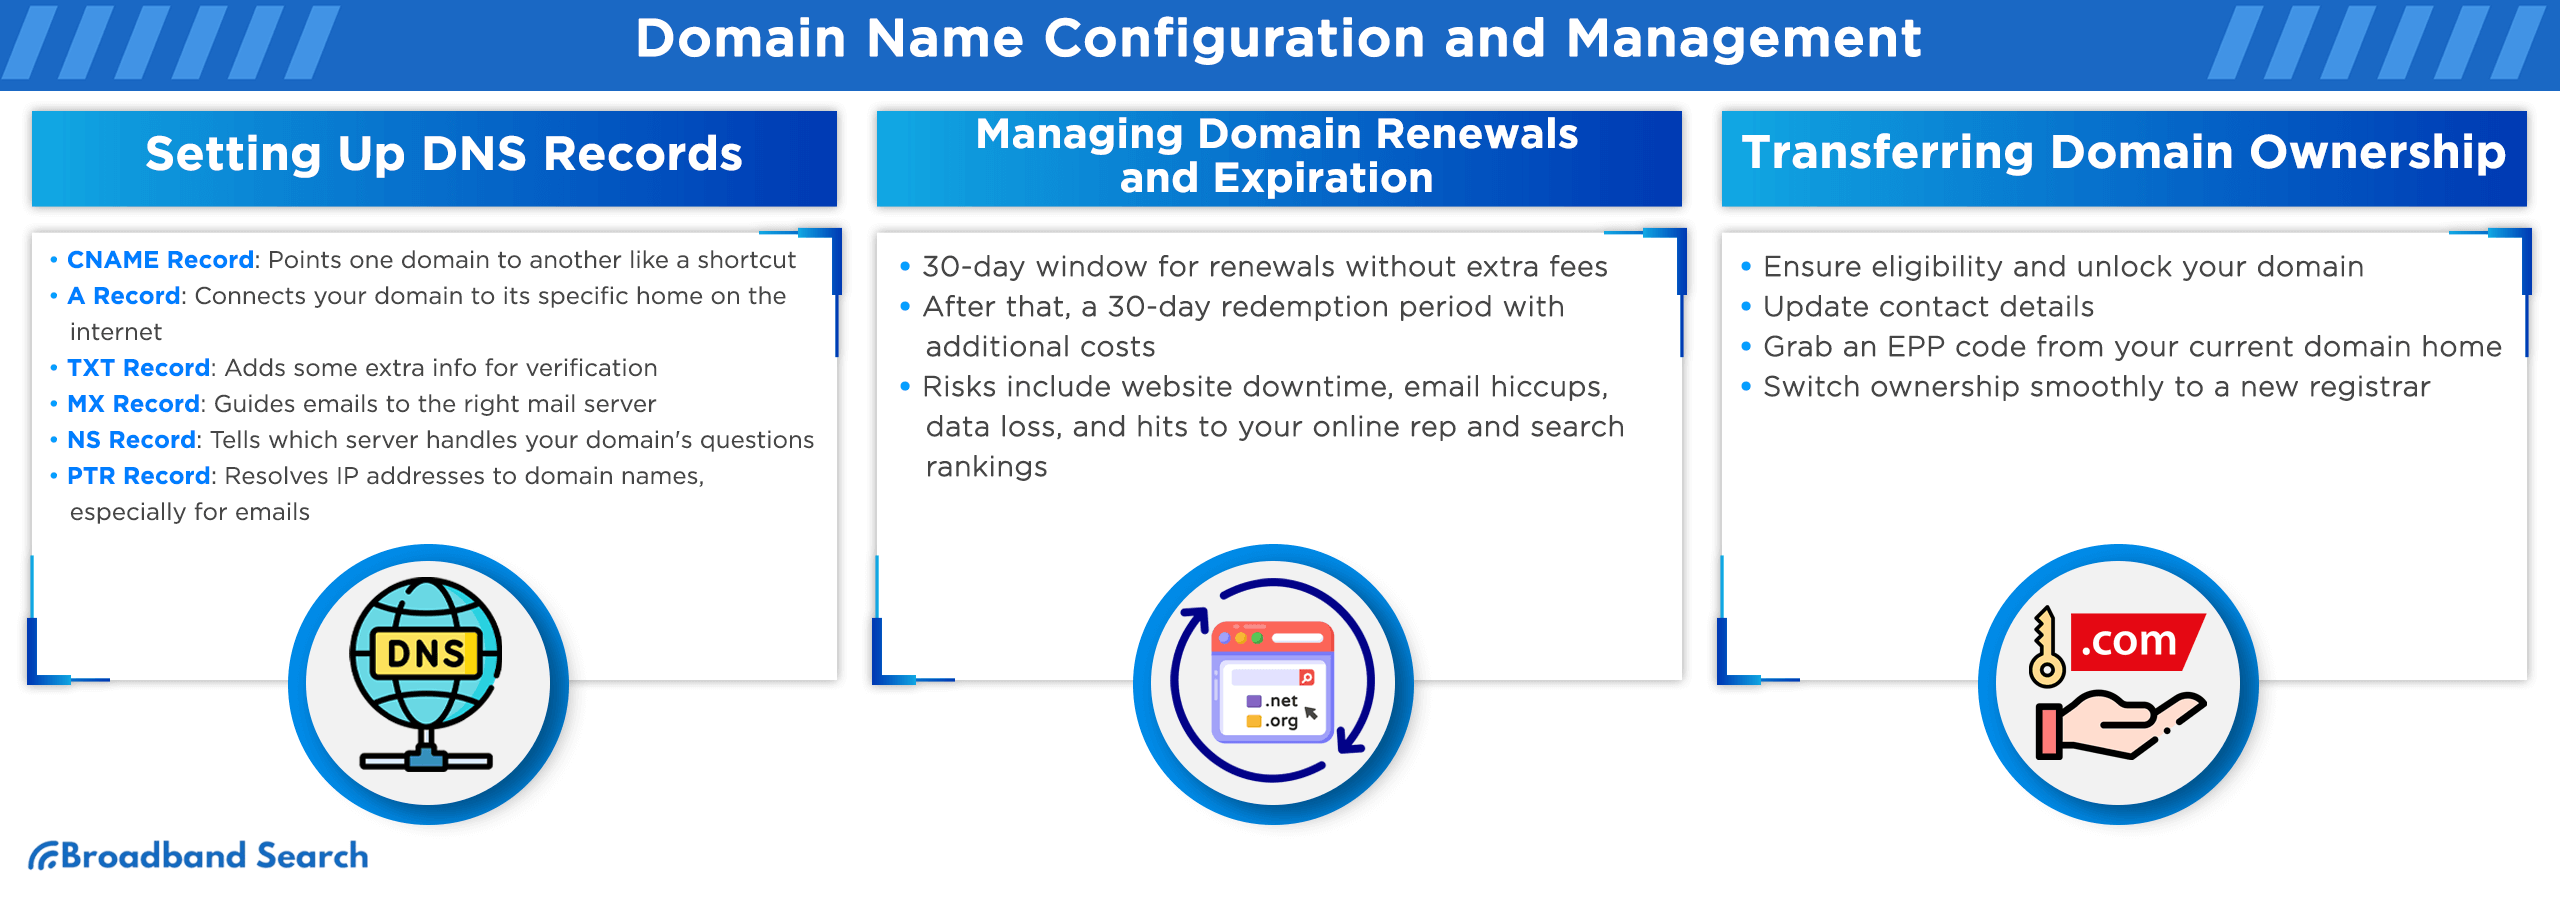 Domain name configuration steps and management